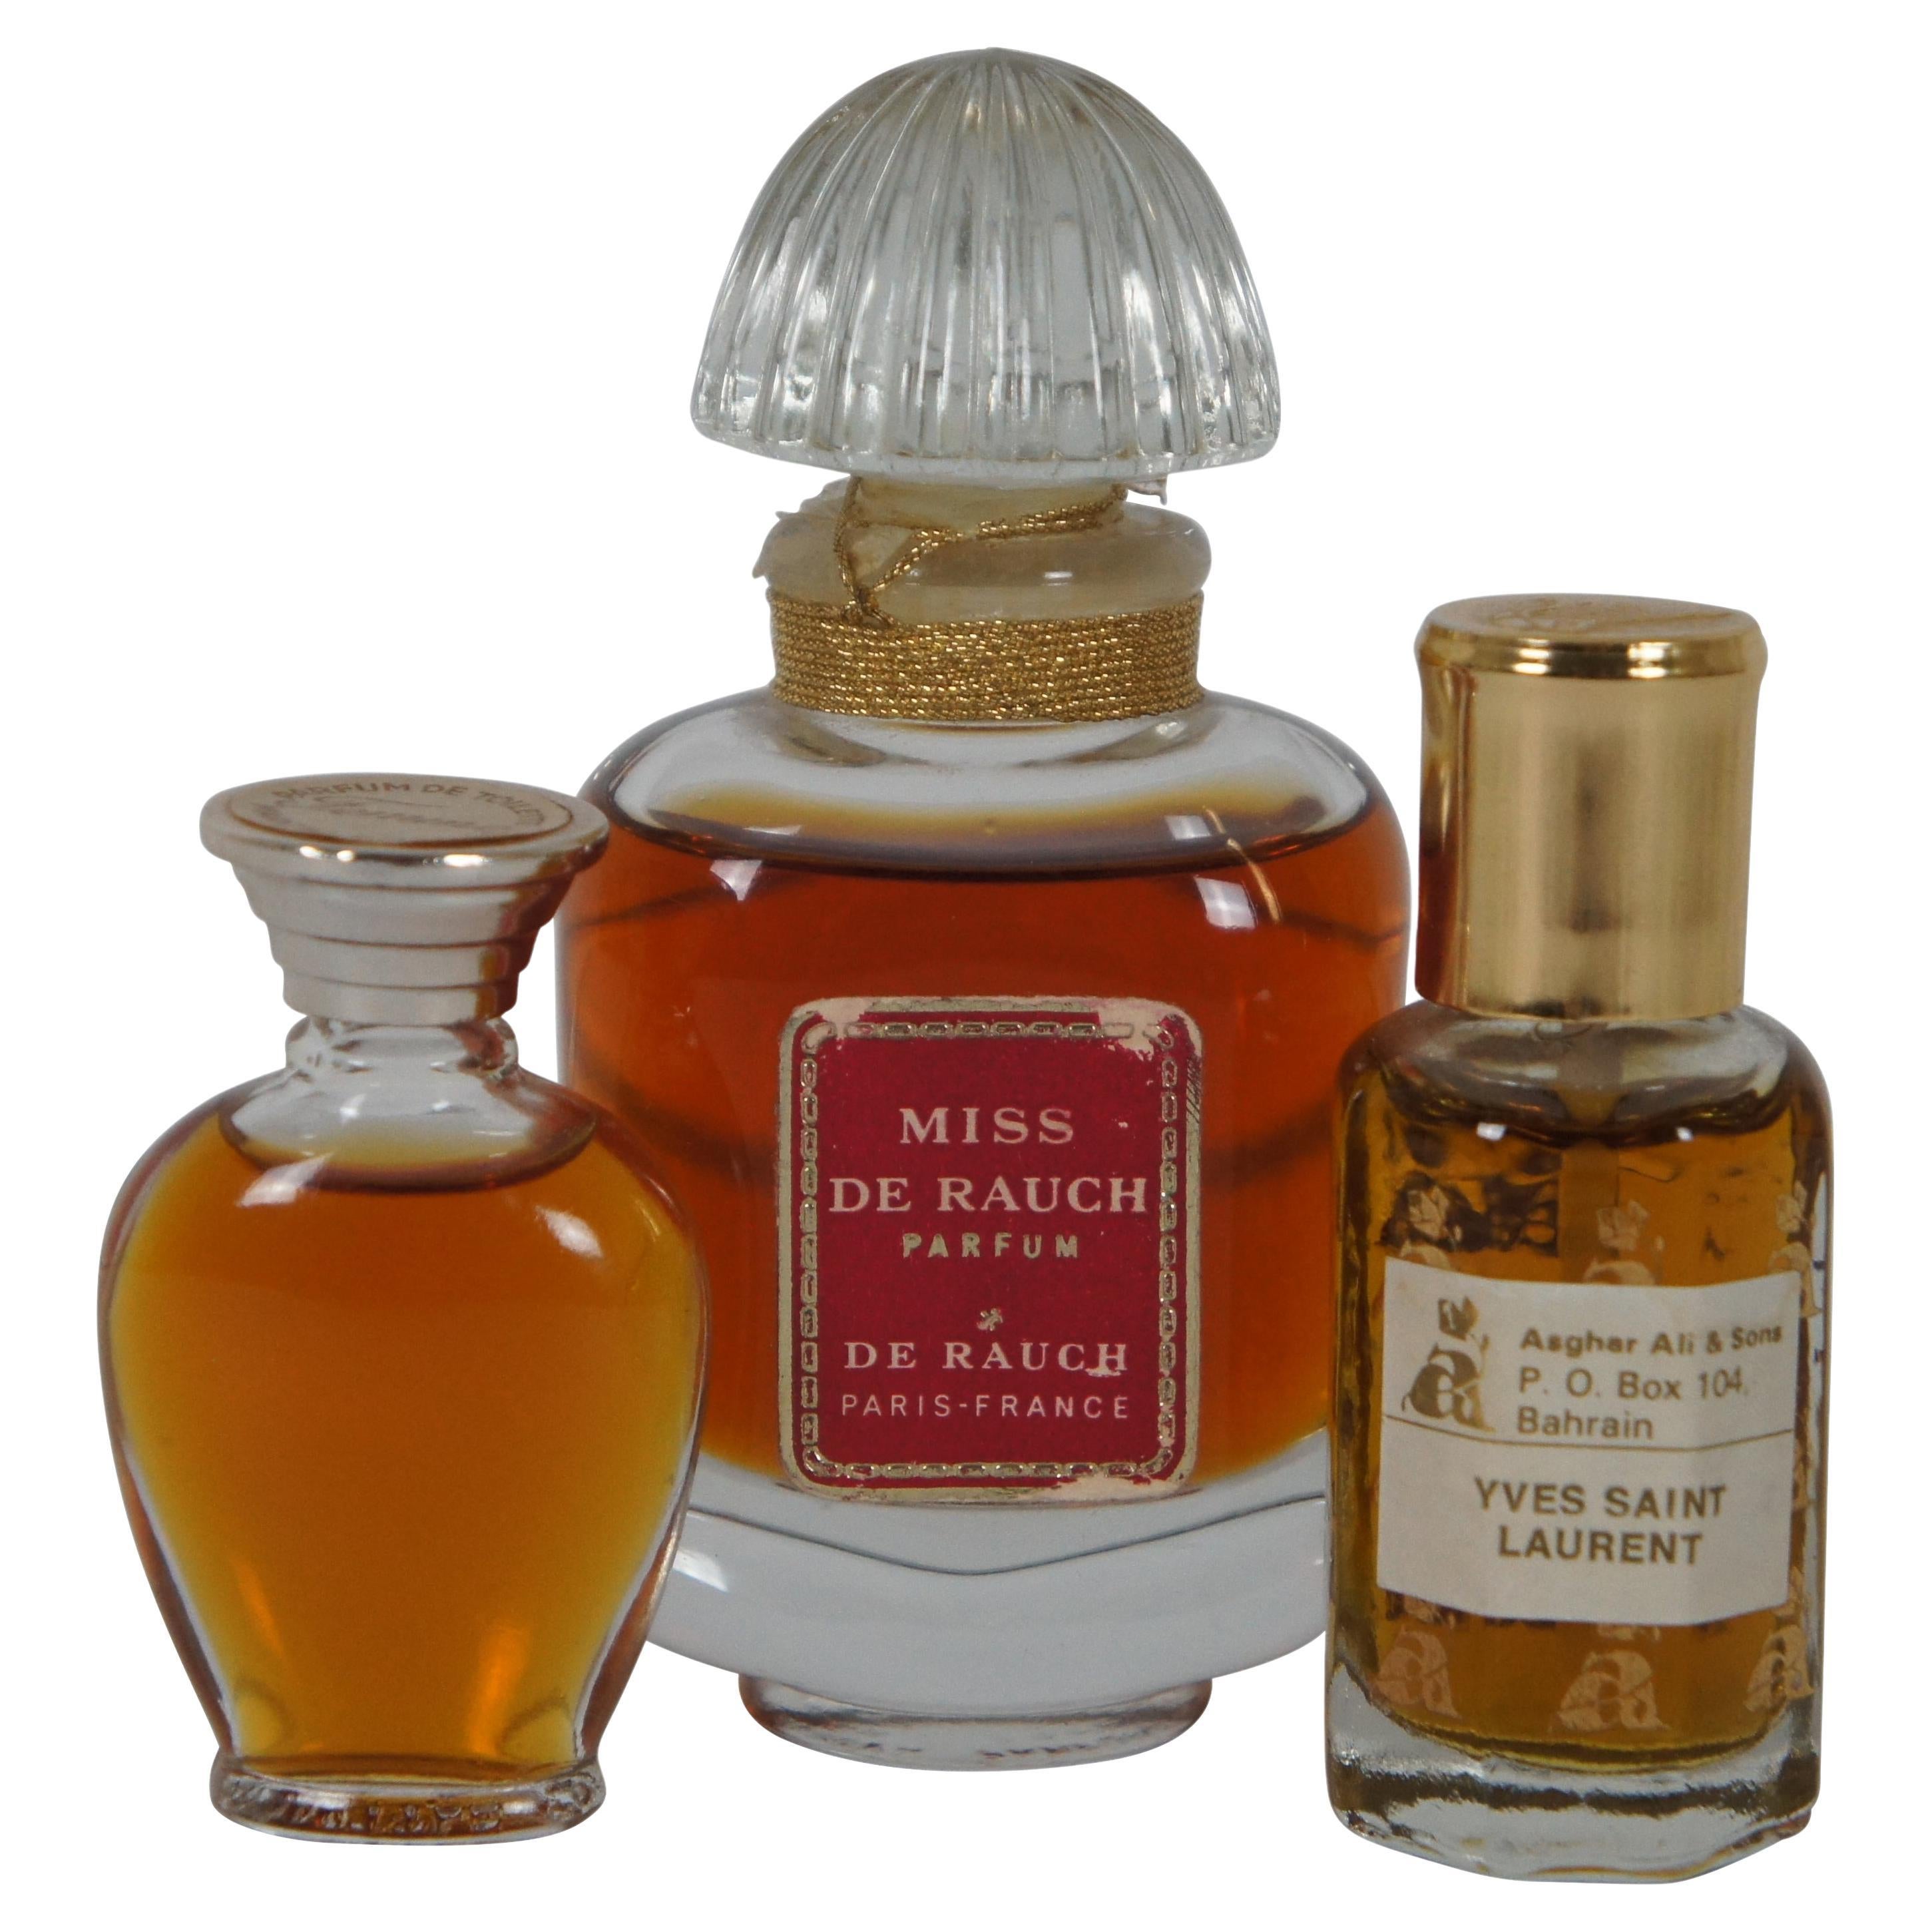 French Perfume Bottles - 415 For Sale on 1stDibs